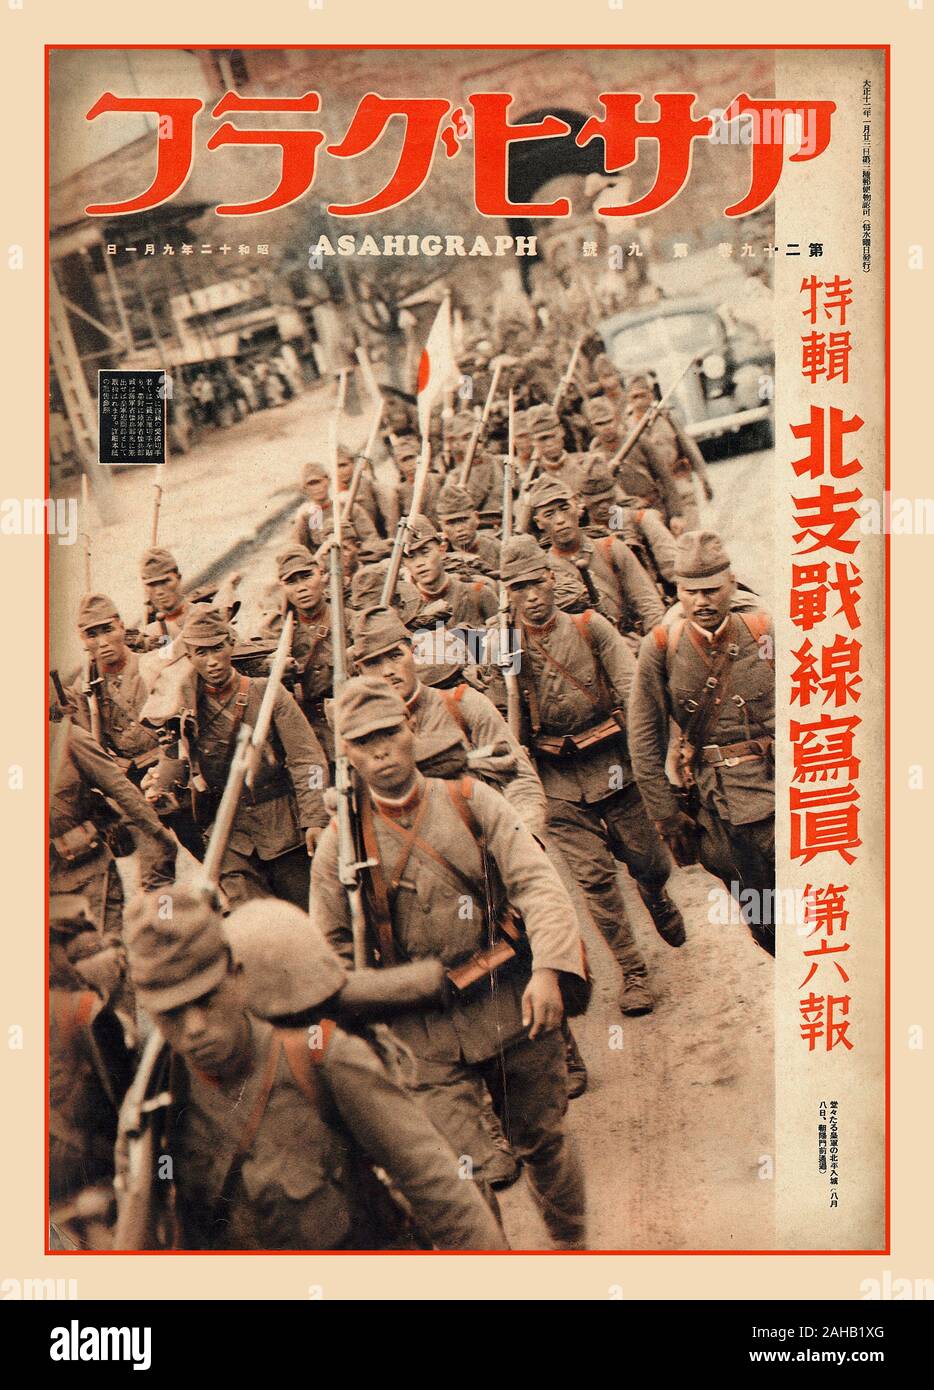 ASAHIGRAPH Vintage Photo page Japanese troops marching in northern China 1 Sep 1937 issue of the Japanese publication Asahigraph, featuring Japanese troops marching in Beijing northern China as a preparation for The Second World War Stock Photo